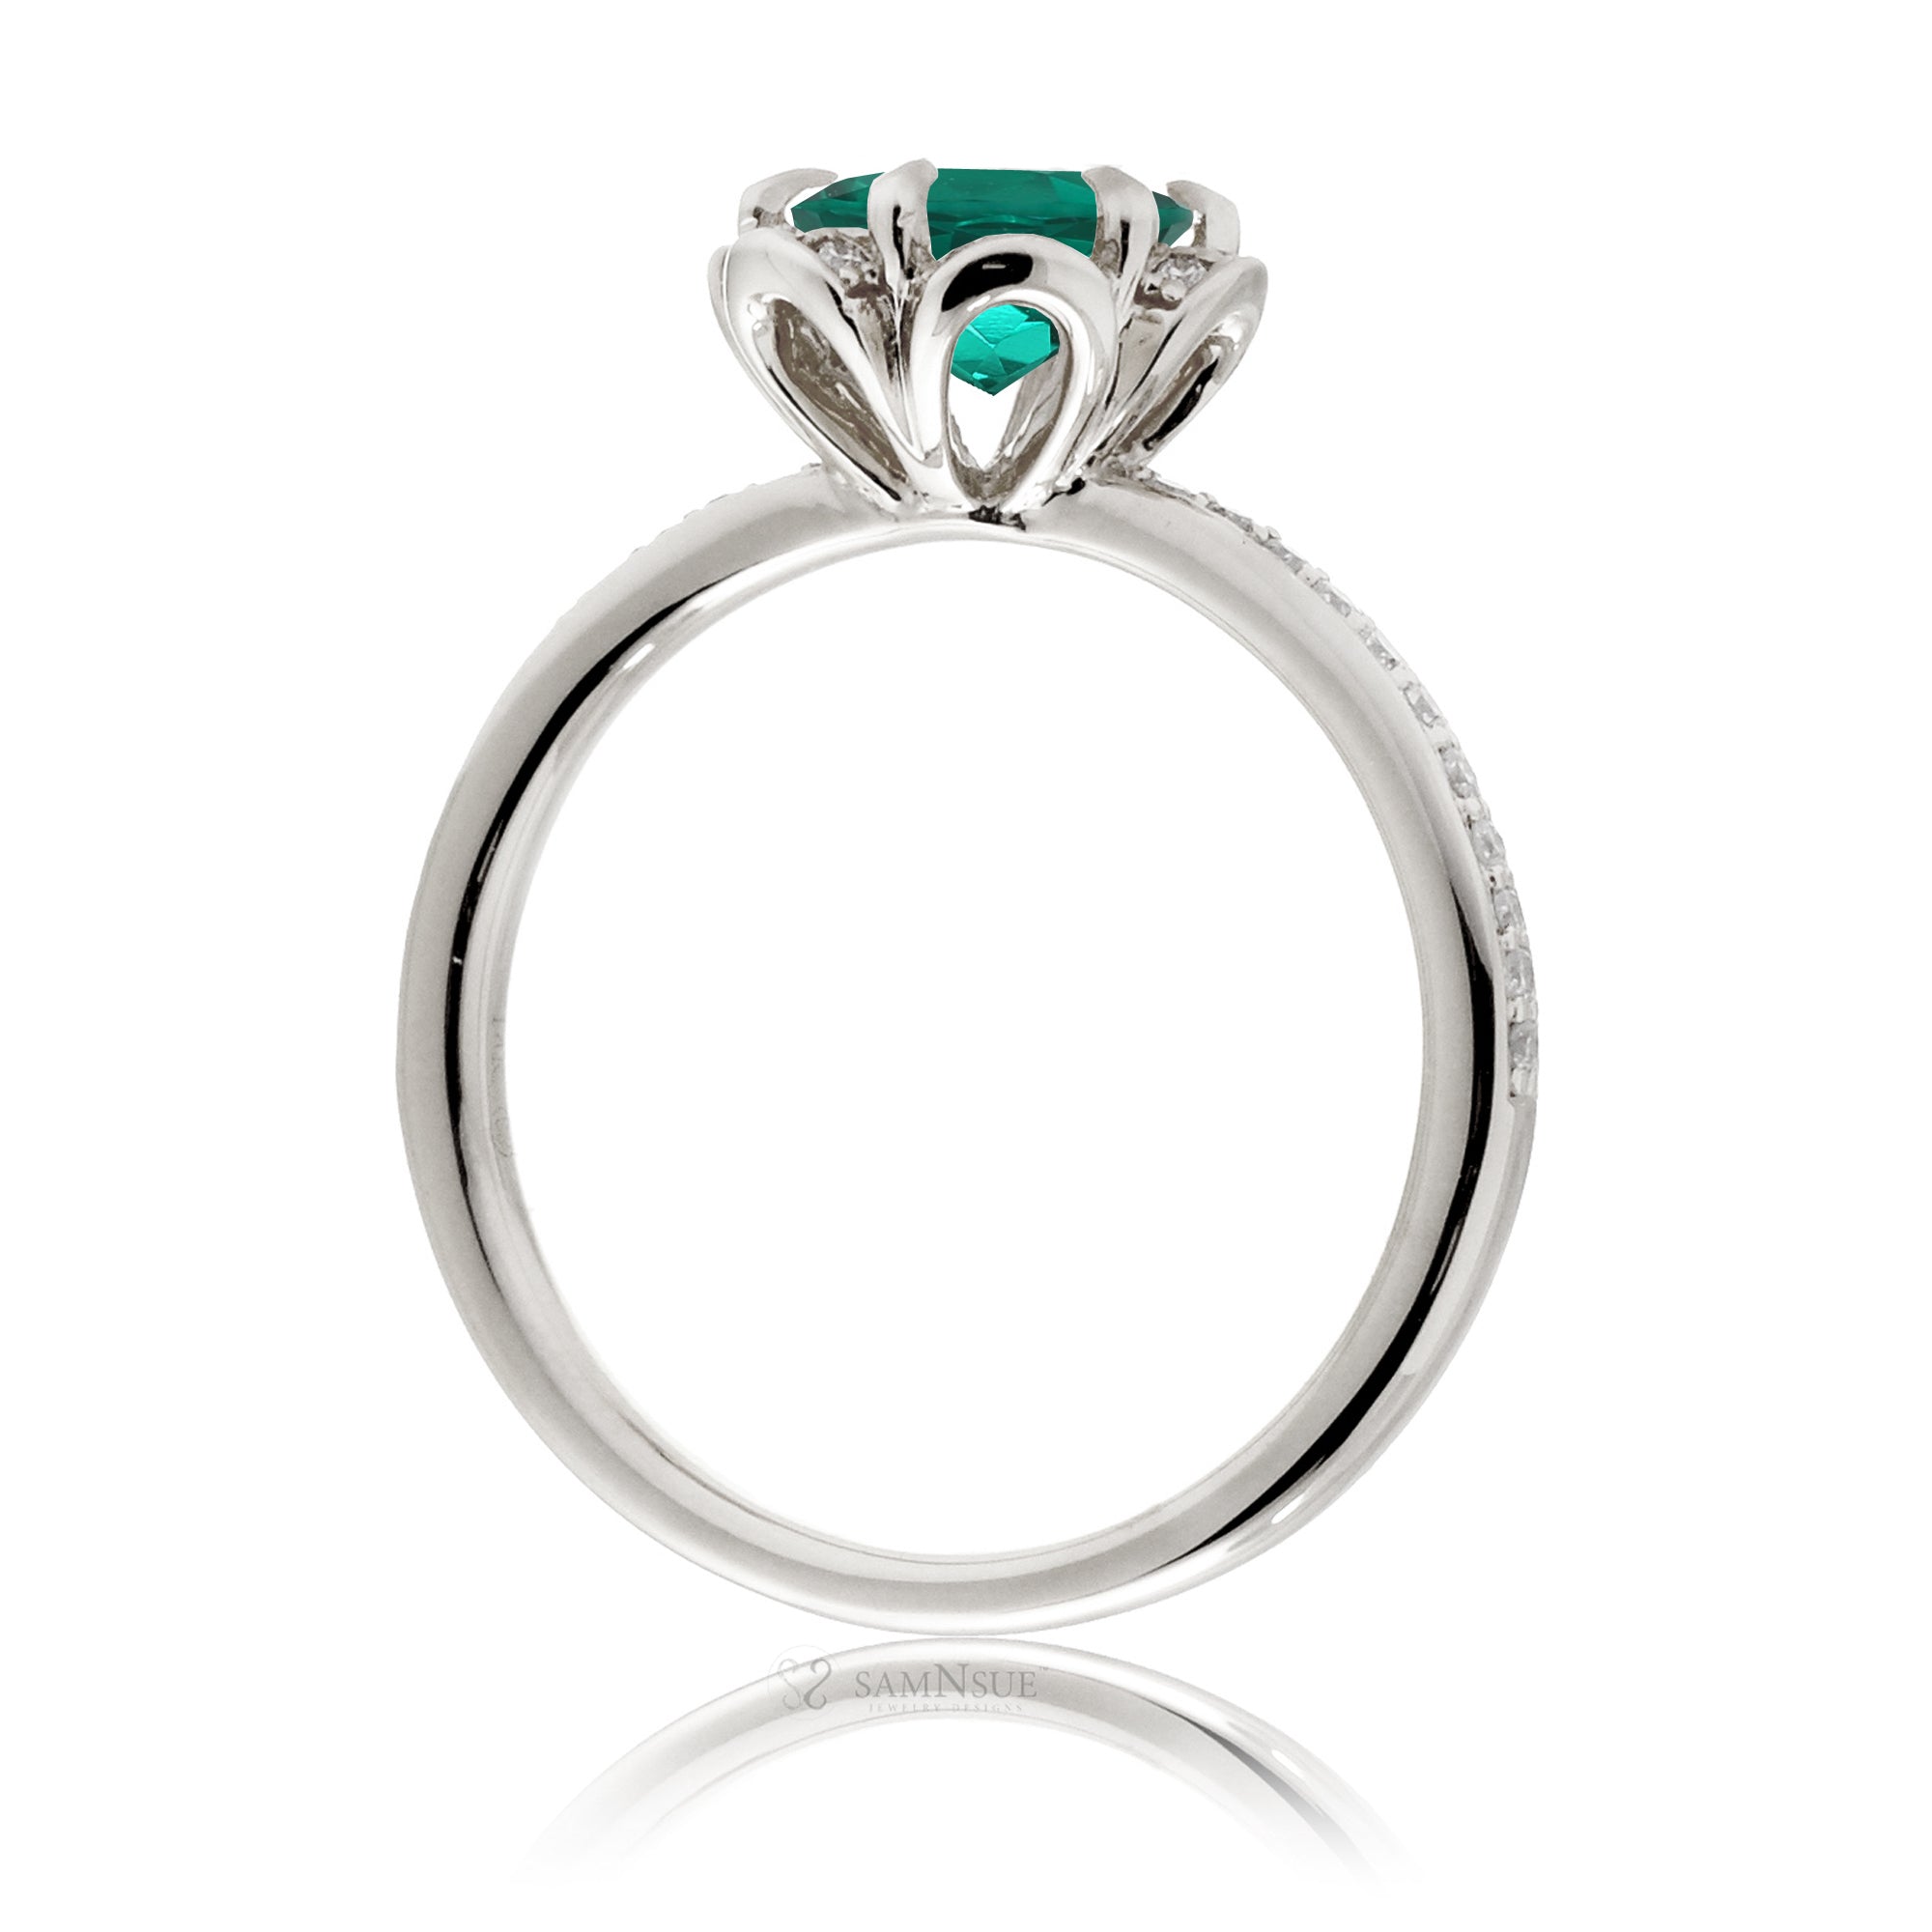 Floral lab-grown round emerald engagement ring white gold